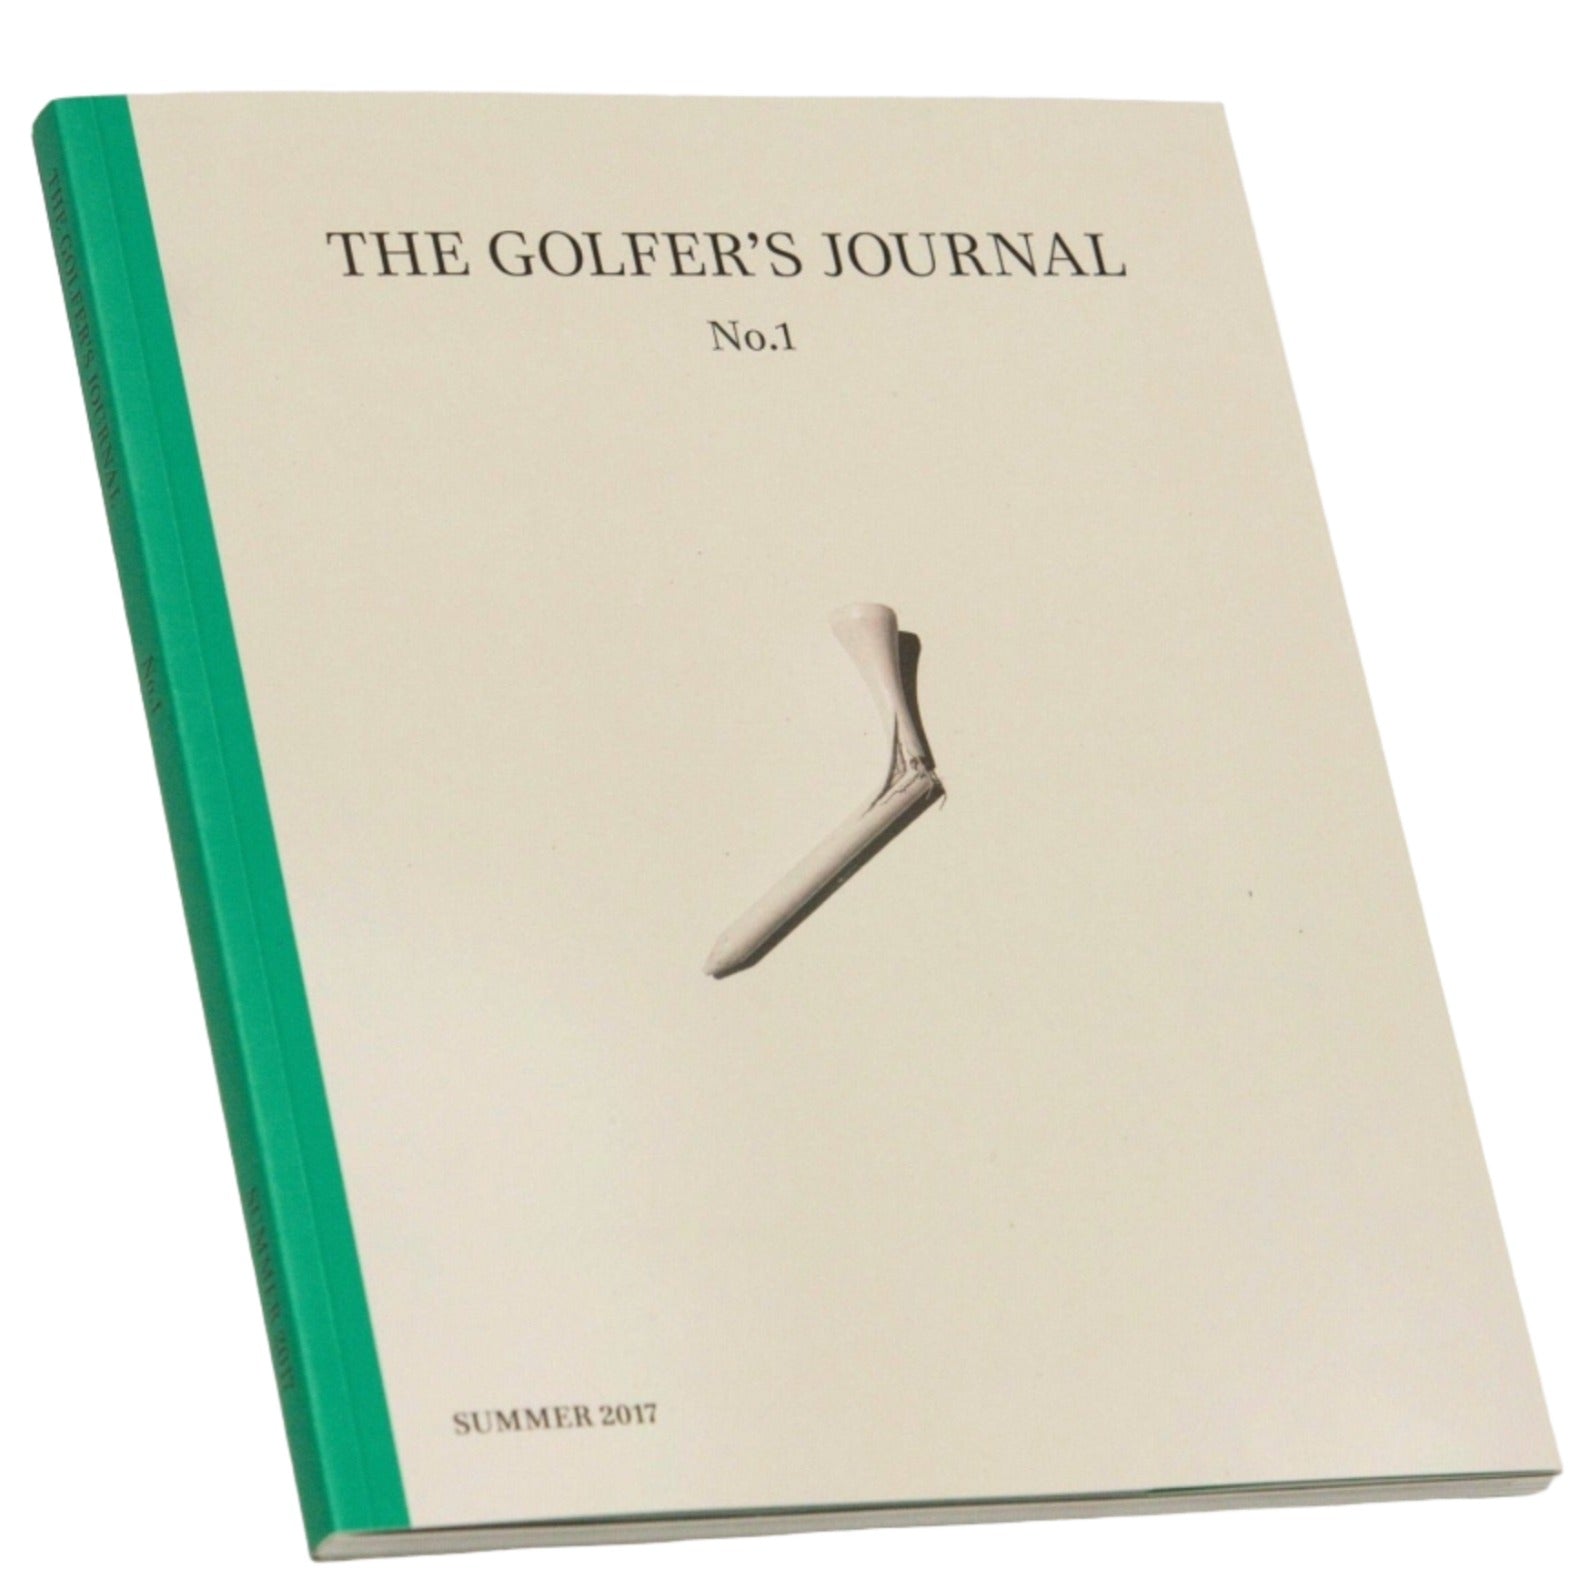 The Golfer's Journal No. 1 Cover with broken tee